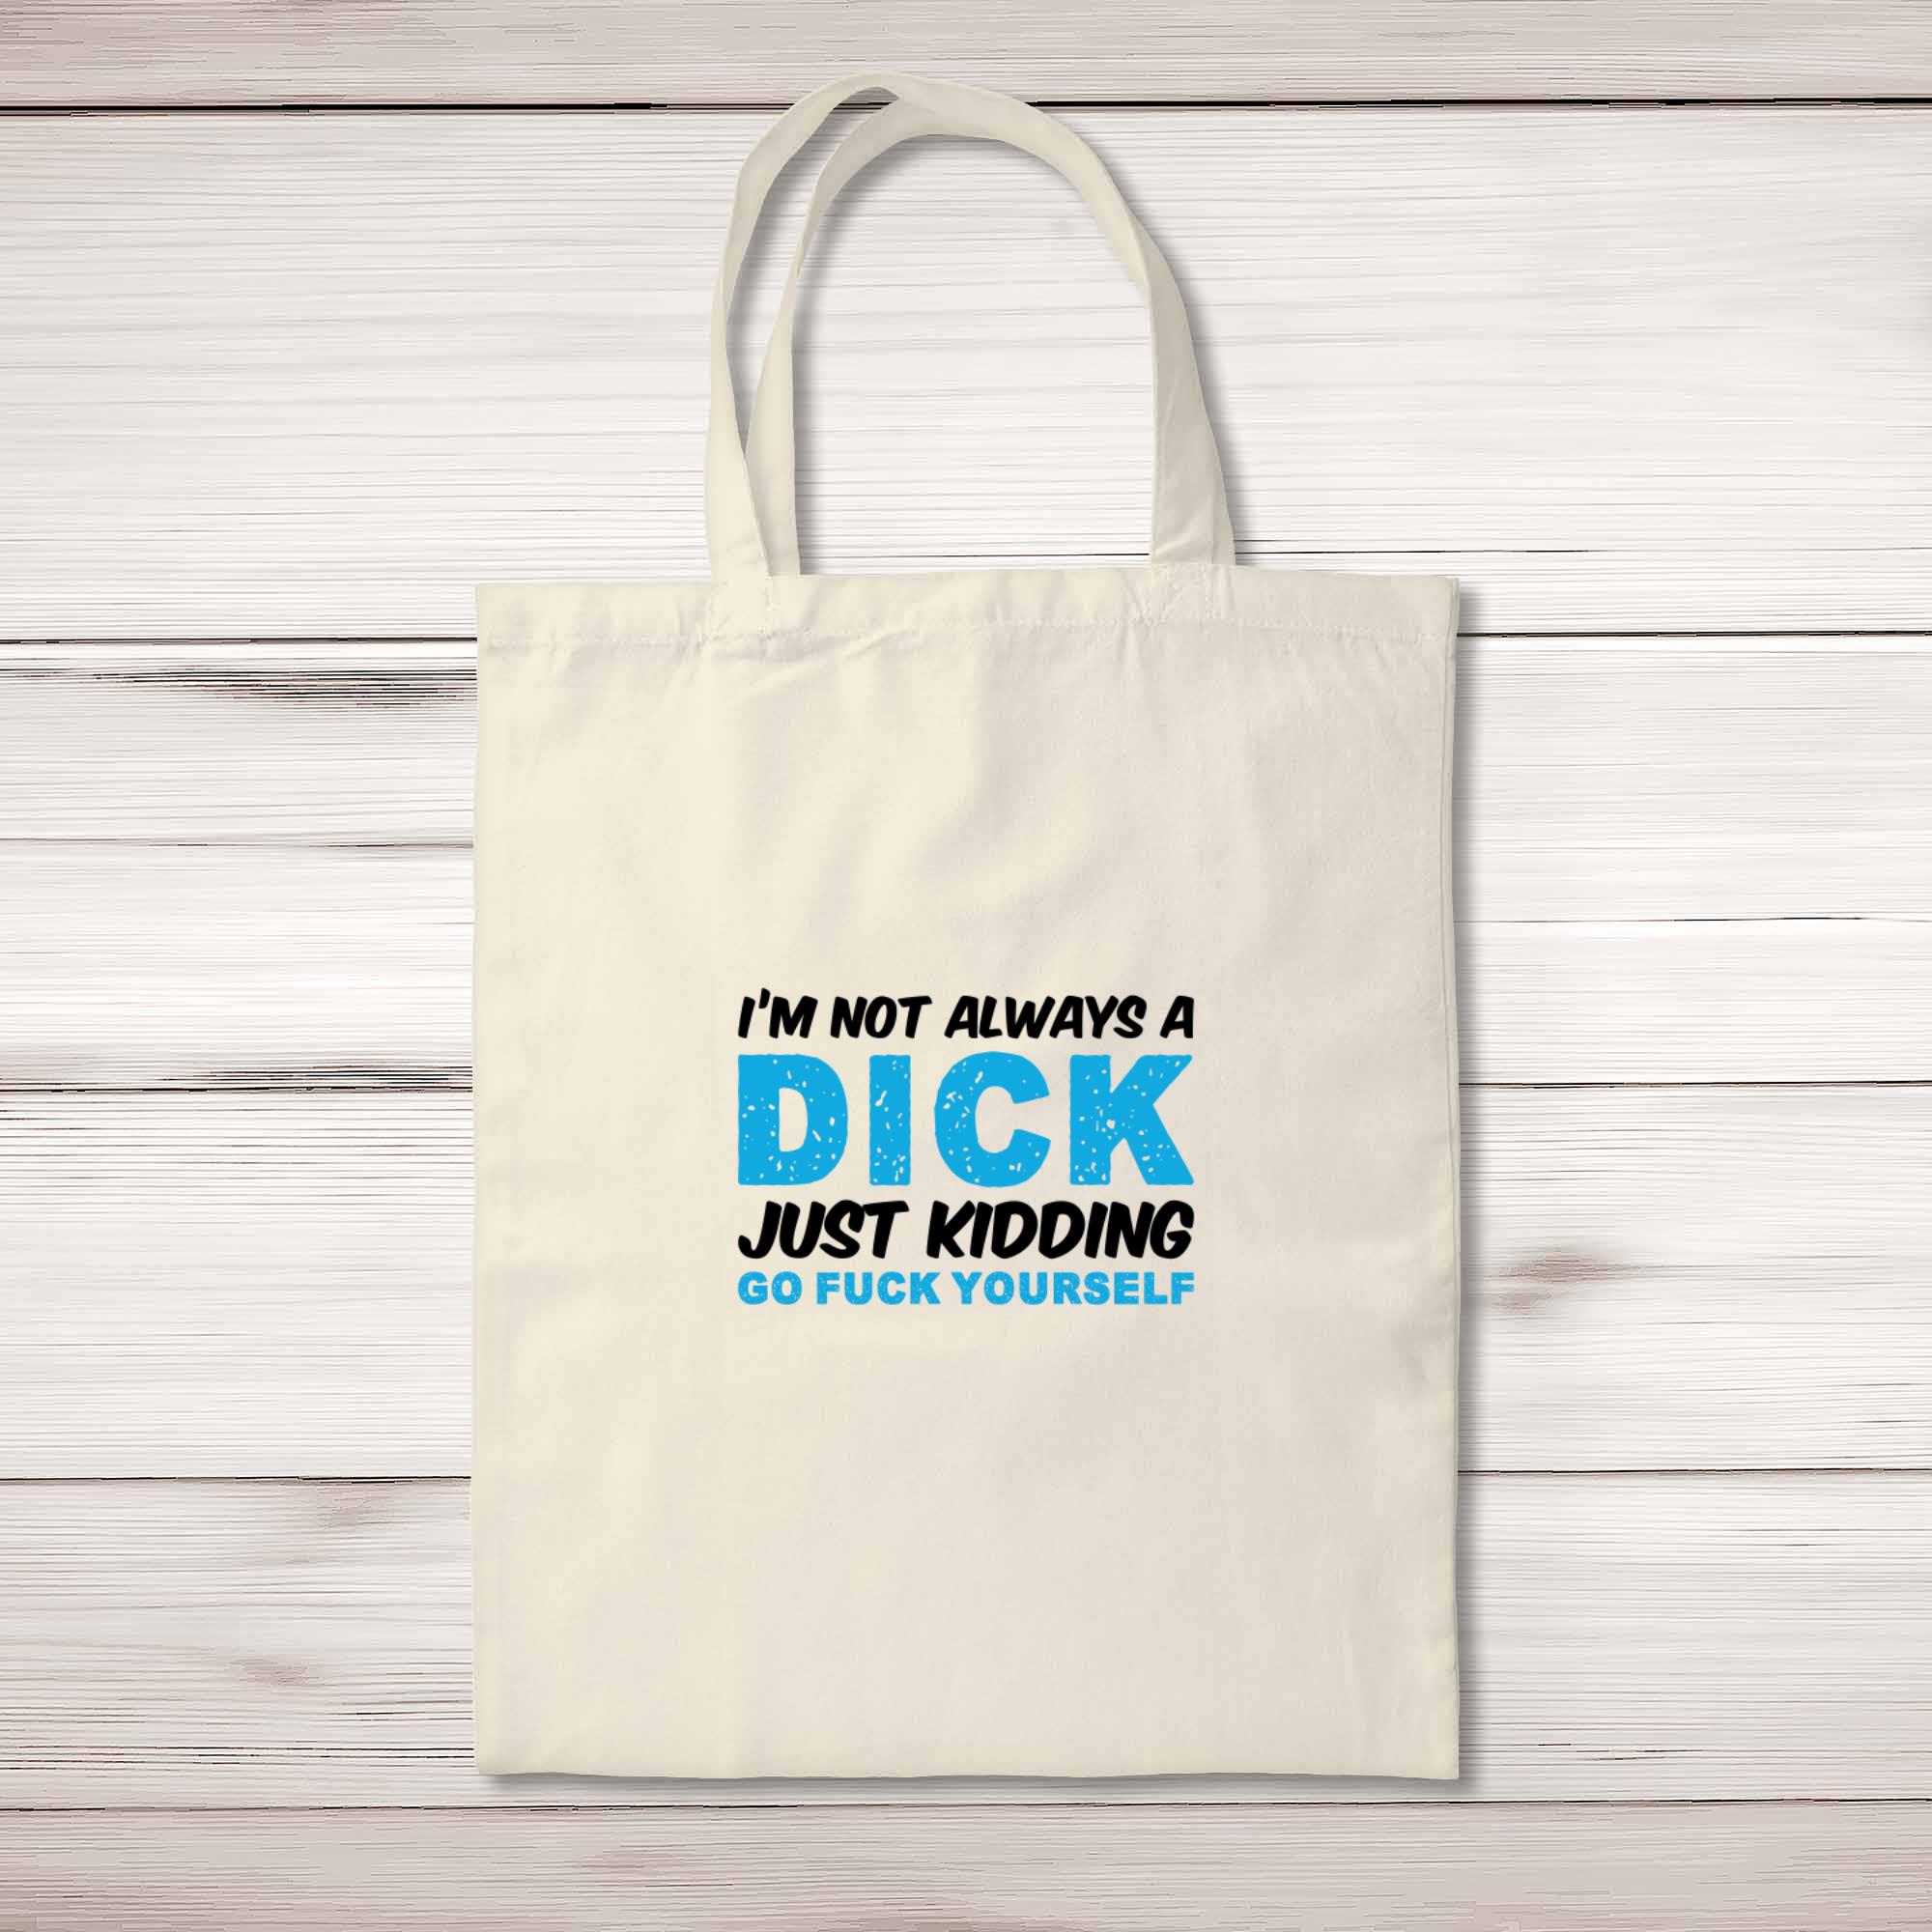 Don't Be A Dick Tote Bag - Funny Tote Bags L Talking Out of Turn by Always Fits